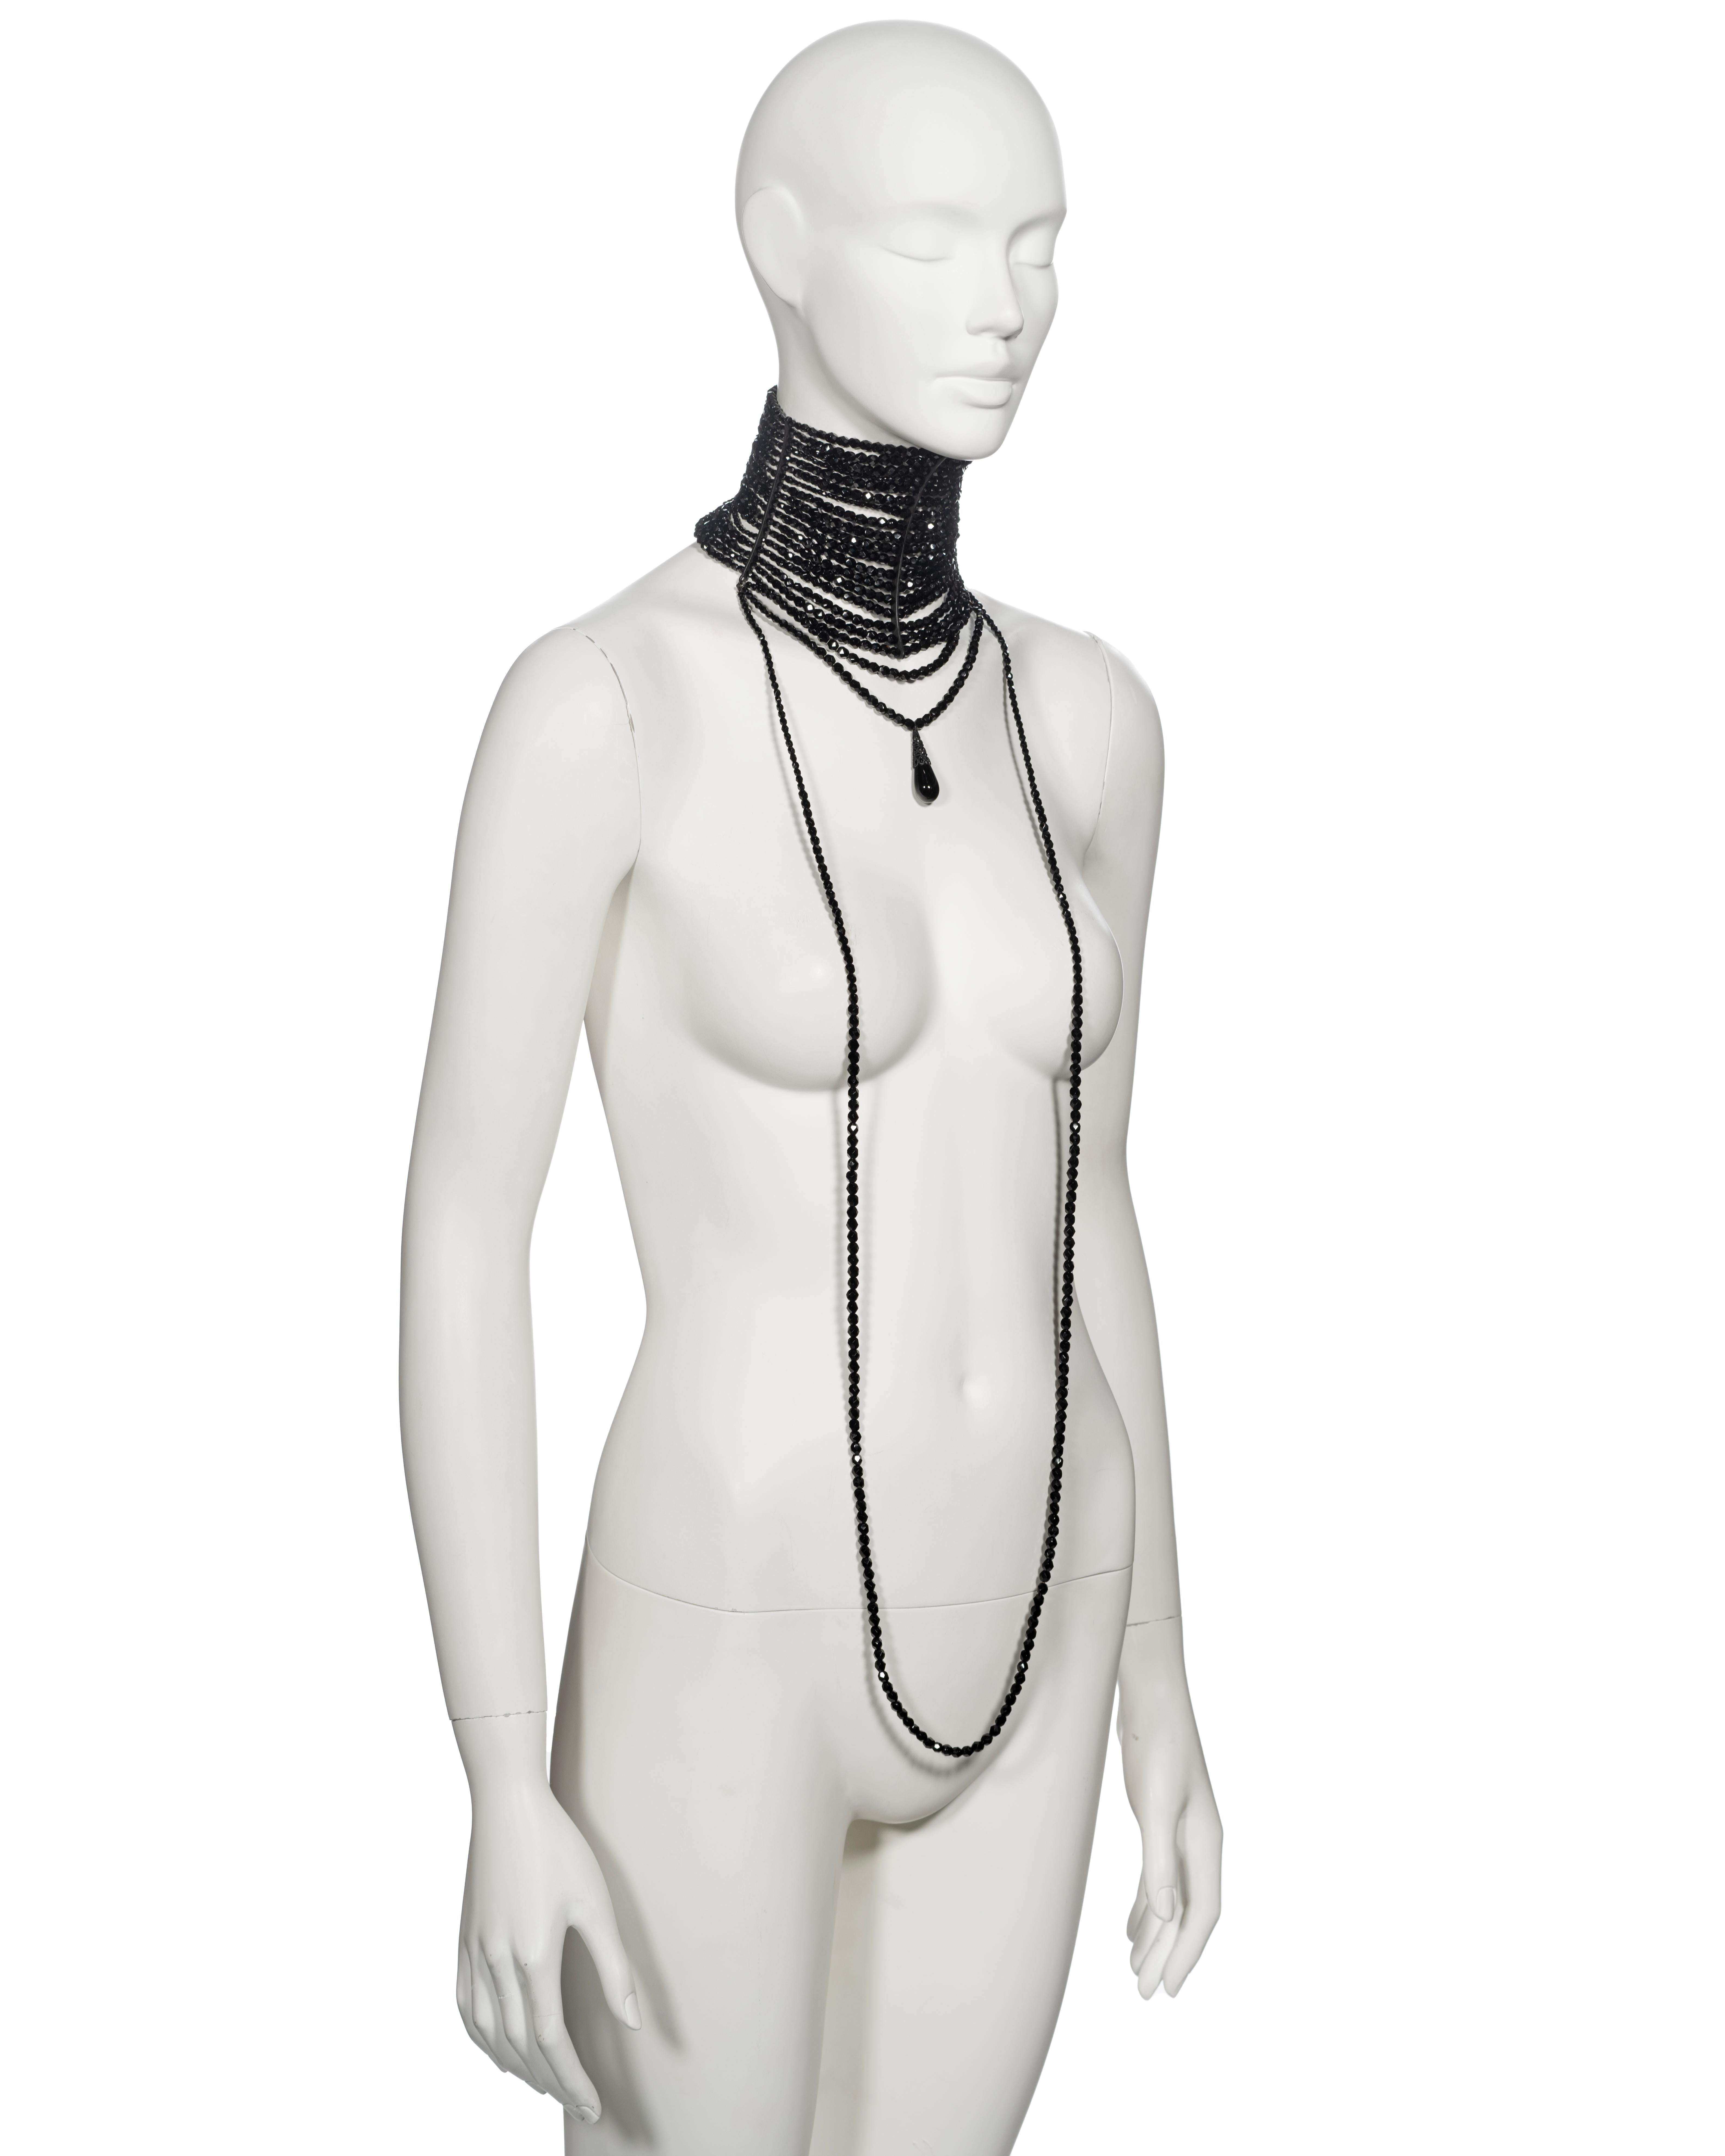 Christian Dior by John Galliano black beaded Masai choker necklace, ss 1999 For Sale 4